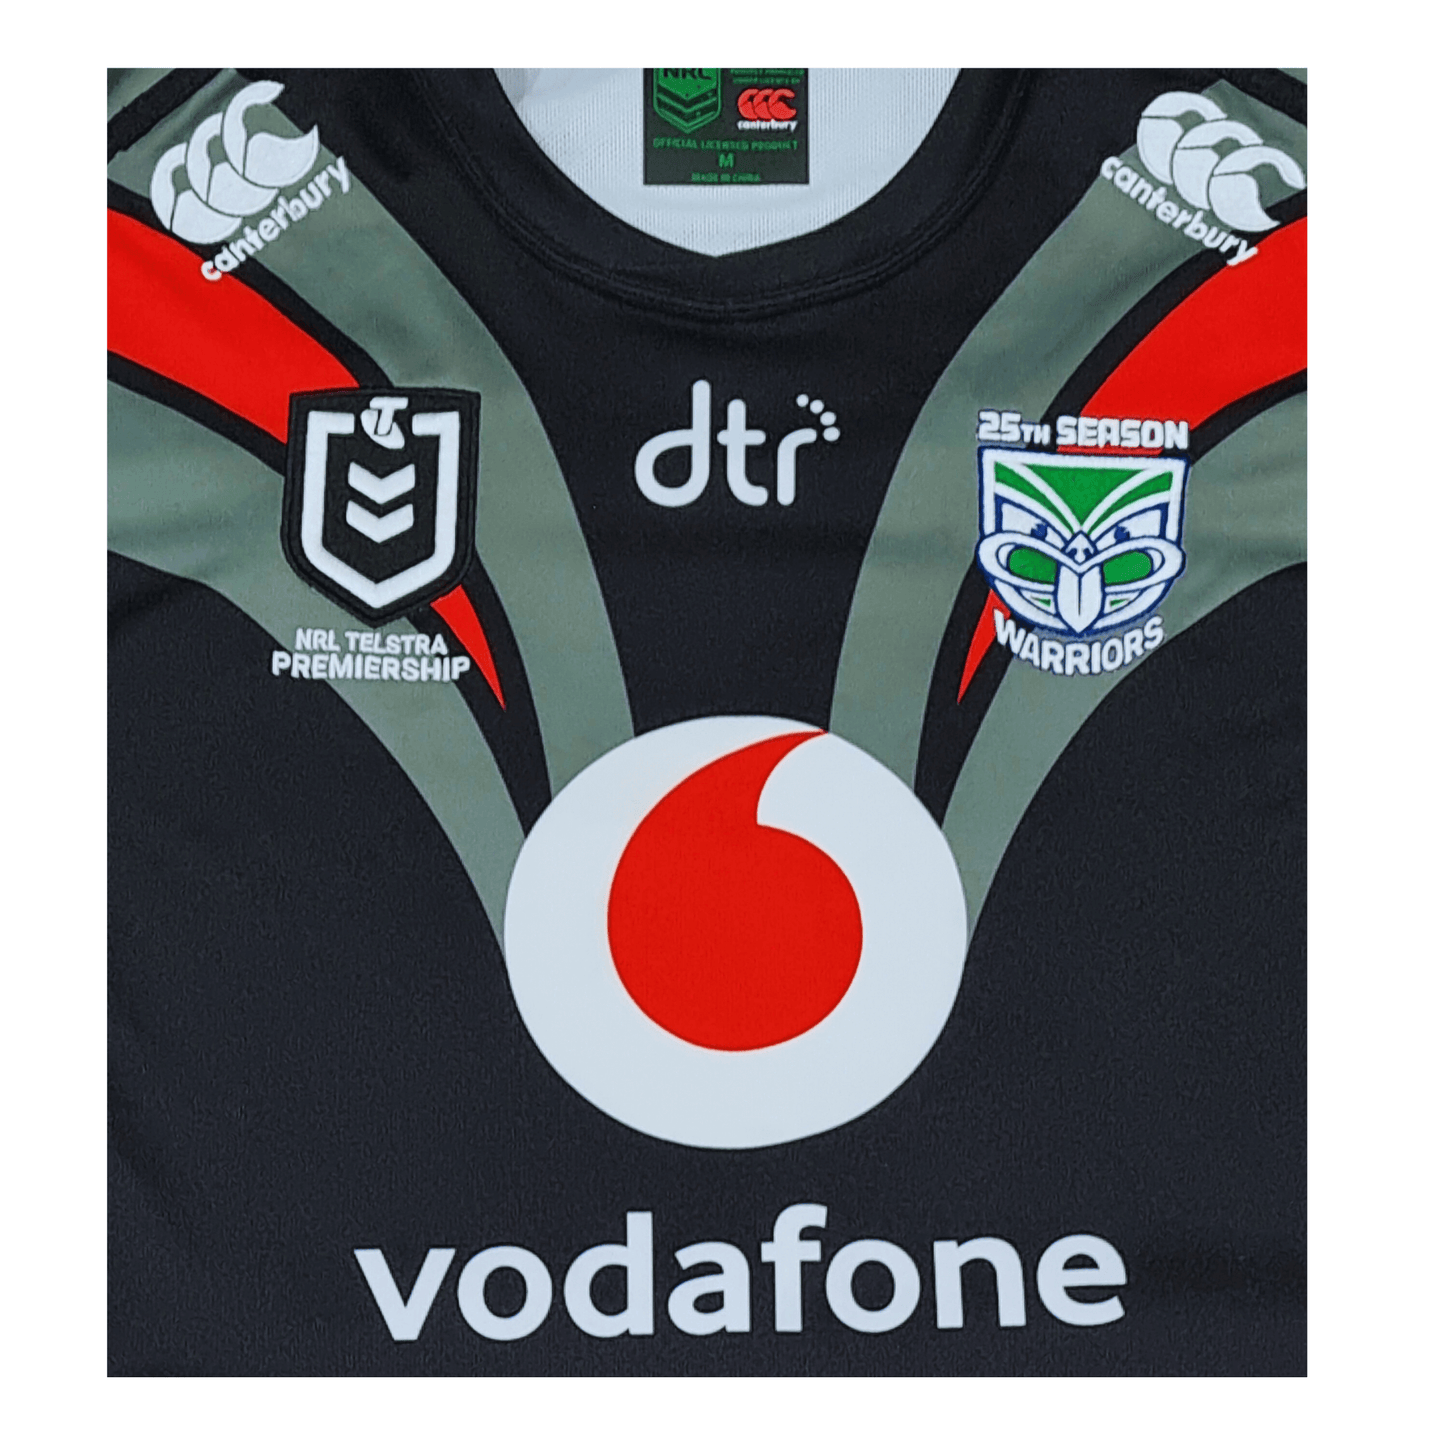 A New Zealand Warriors 2019 Away Jersey with a Vodafone logo on it.